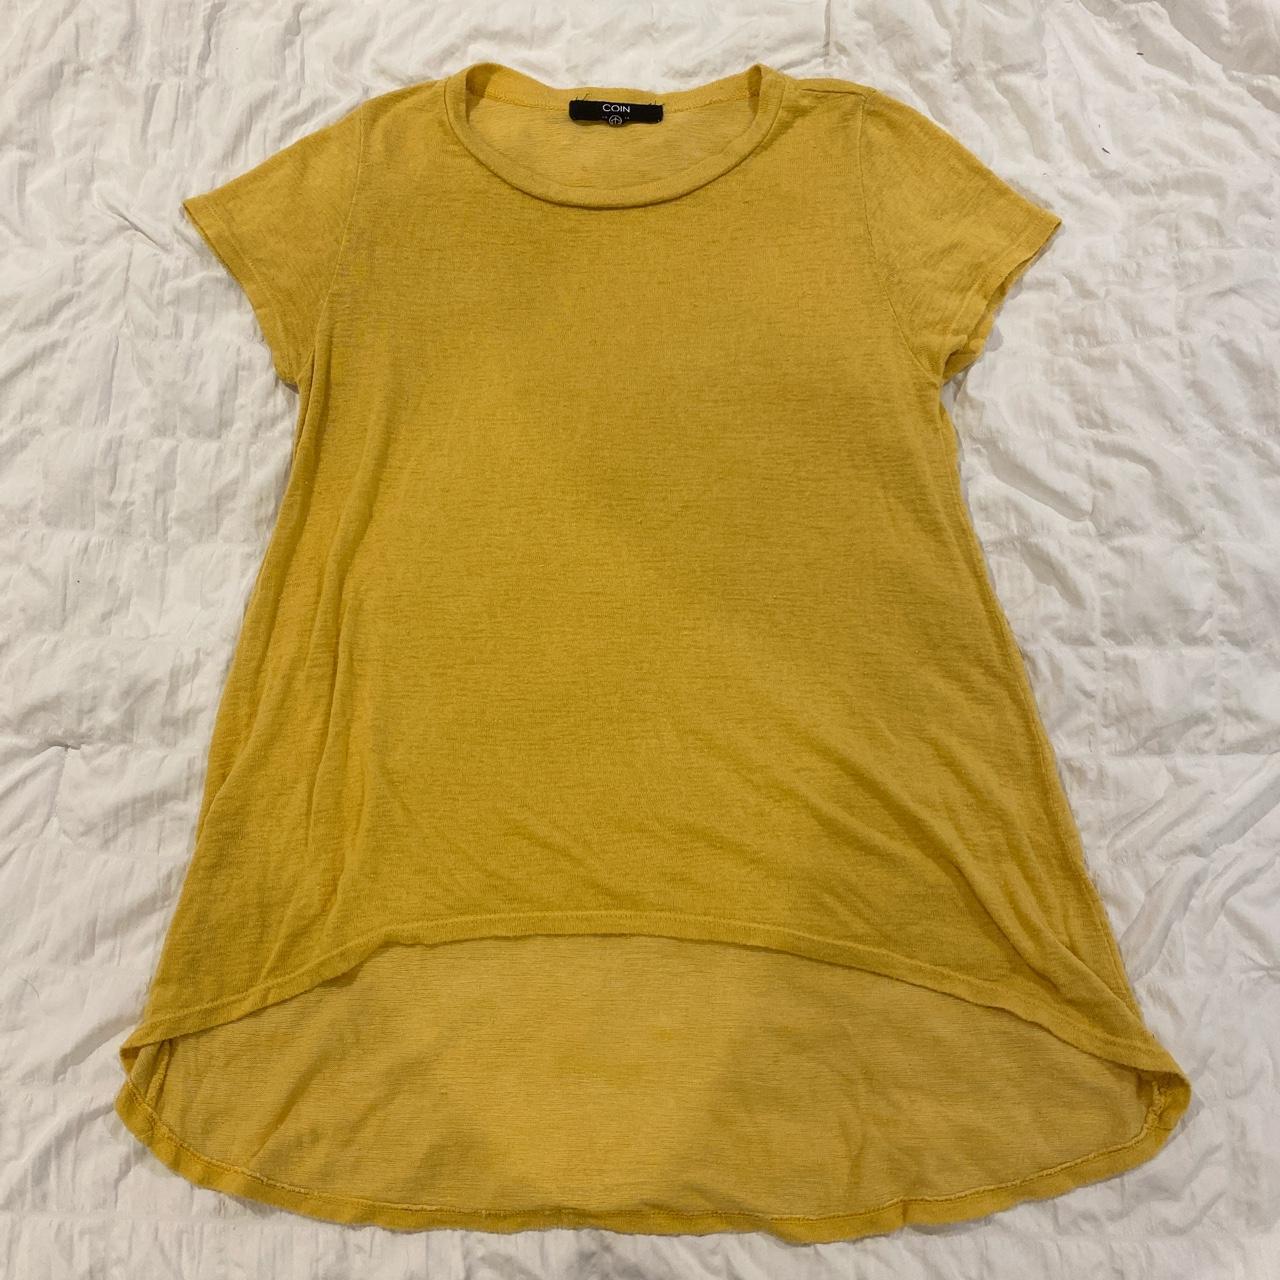 Product Image 1 - -yellow short sleeve top
-size small
-barely